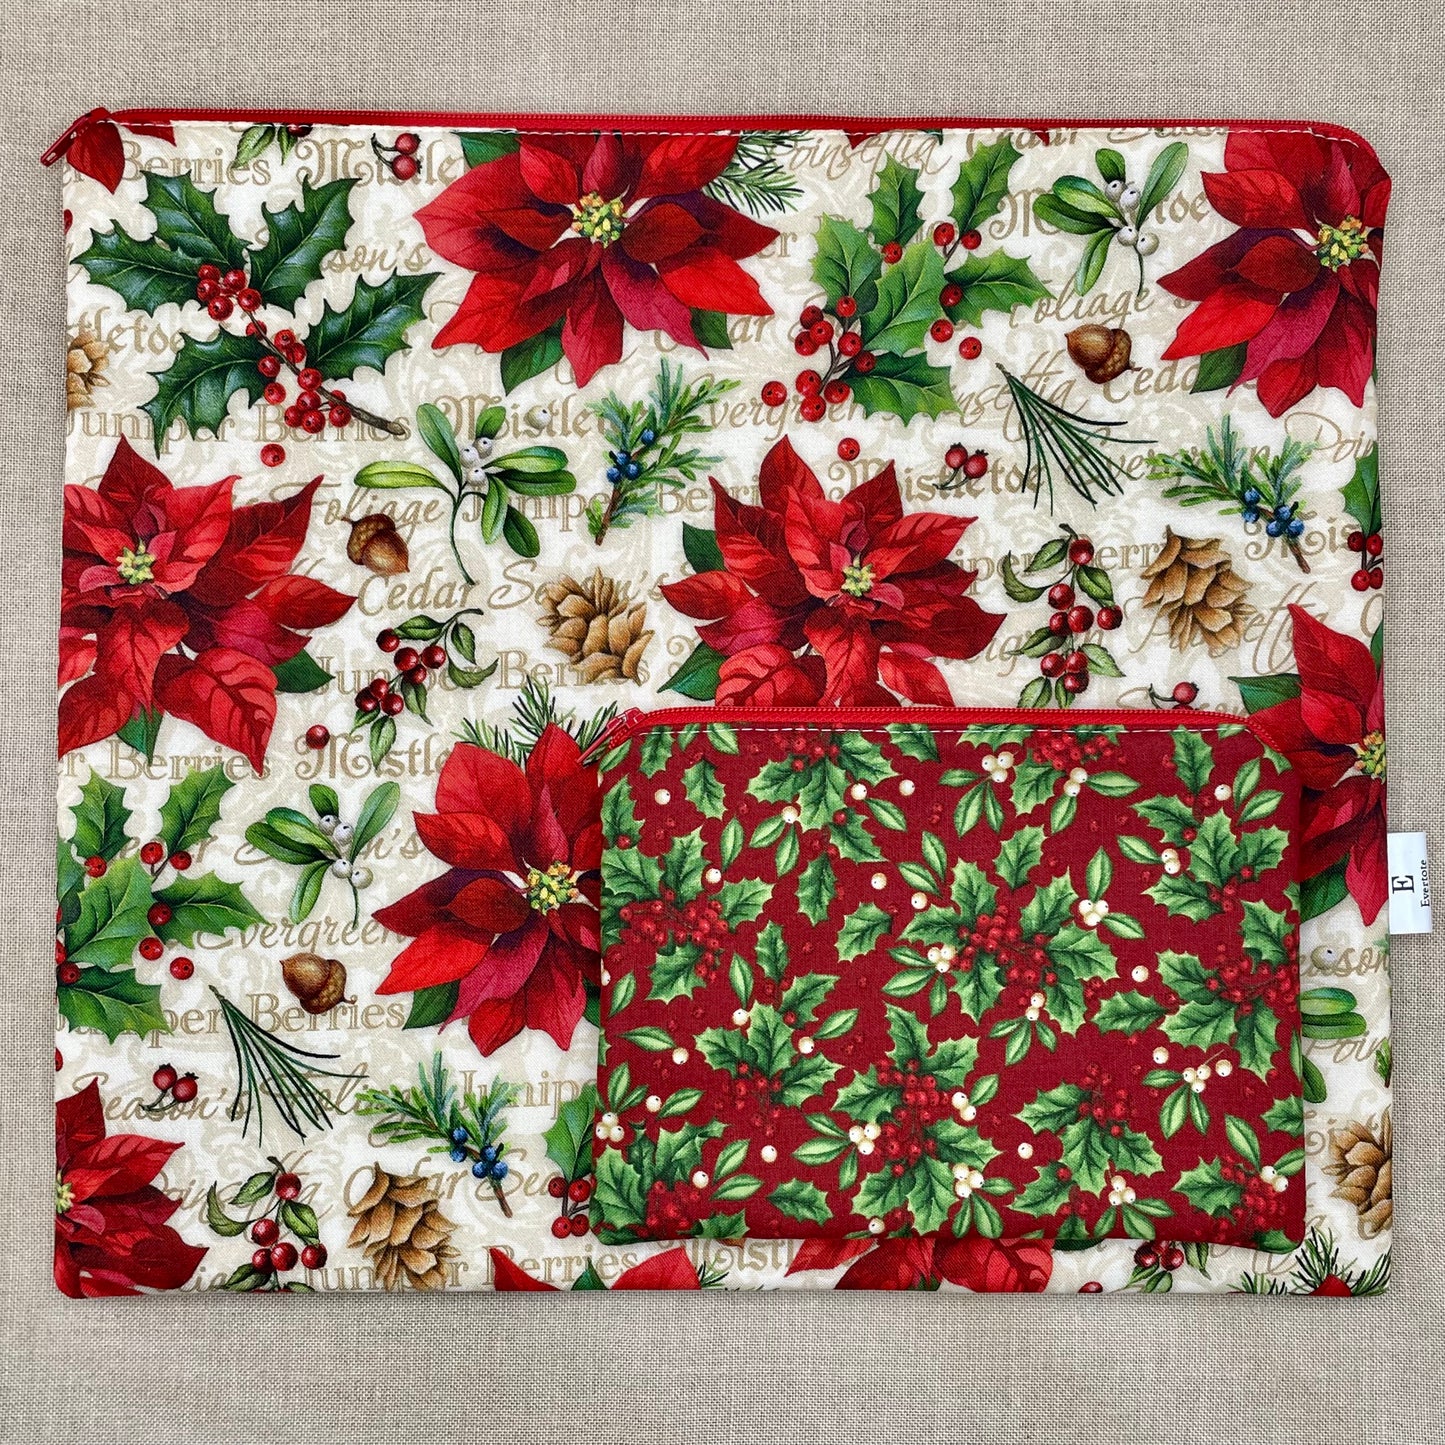 Poinsettias - Project Bag with Coordinating Notions Pouch